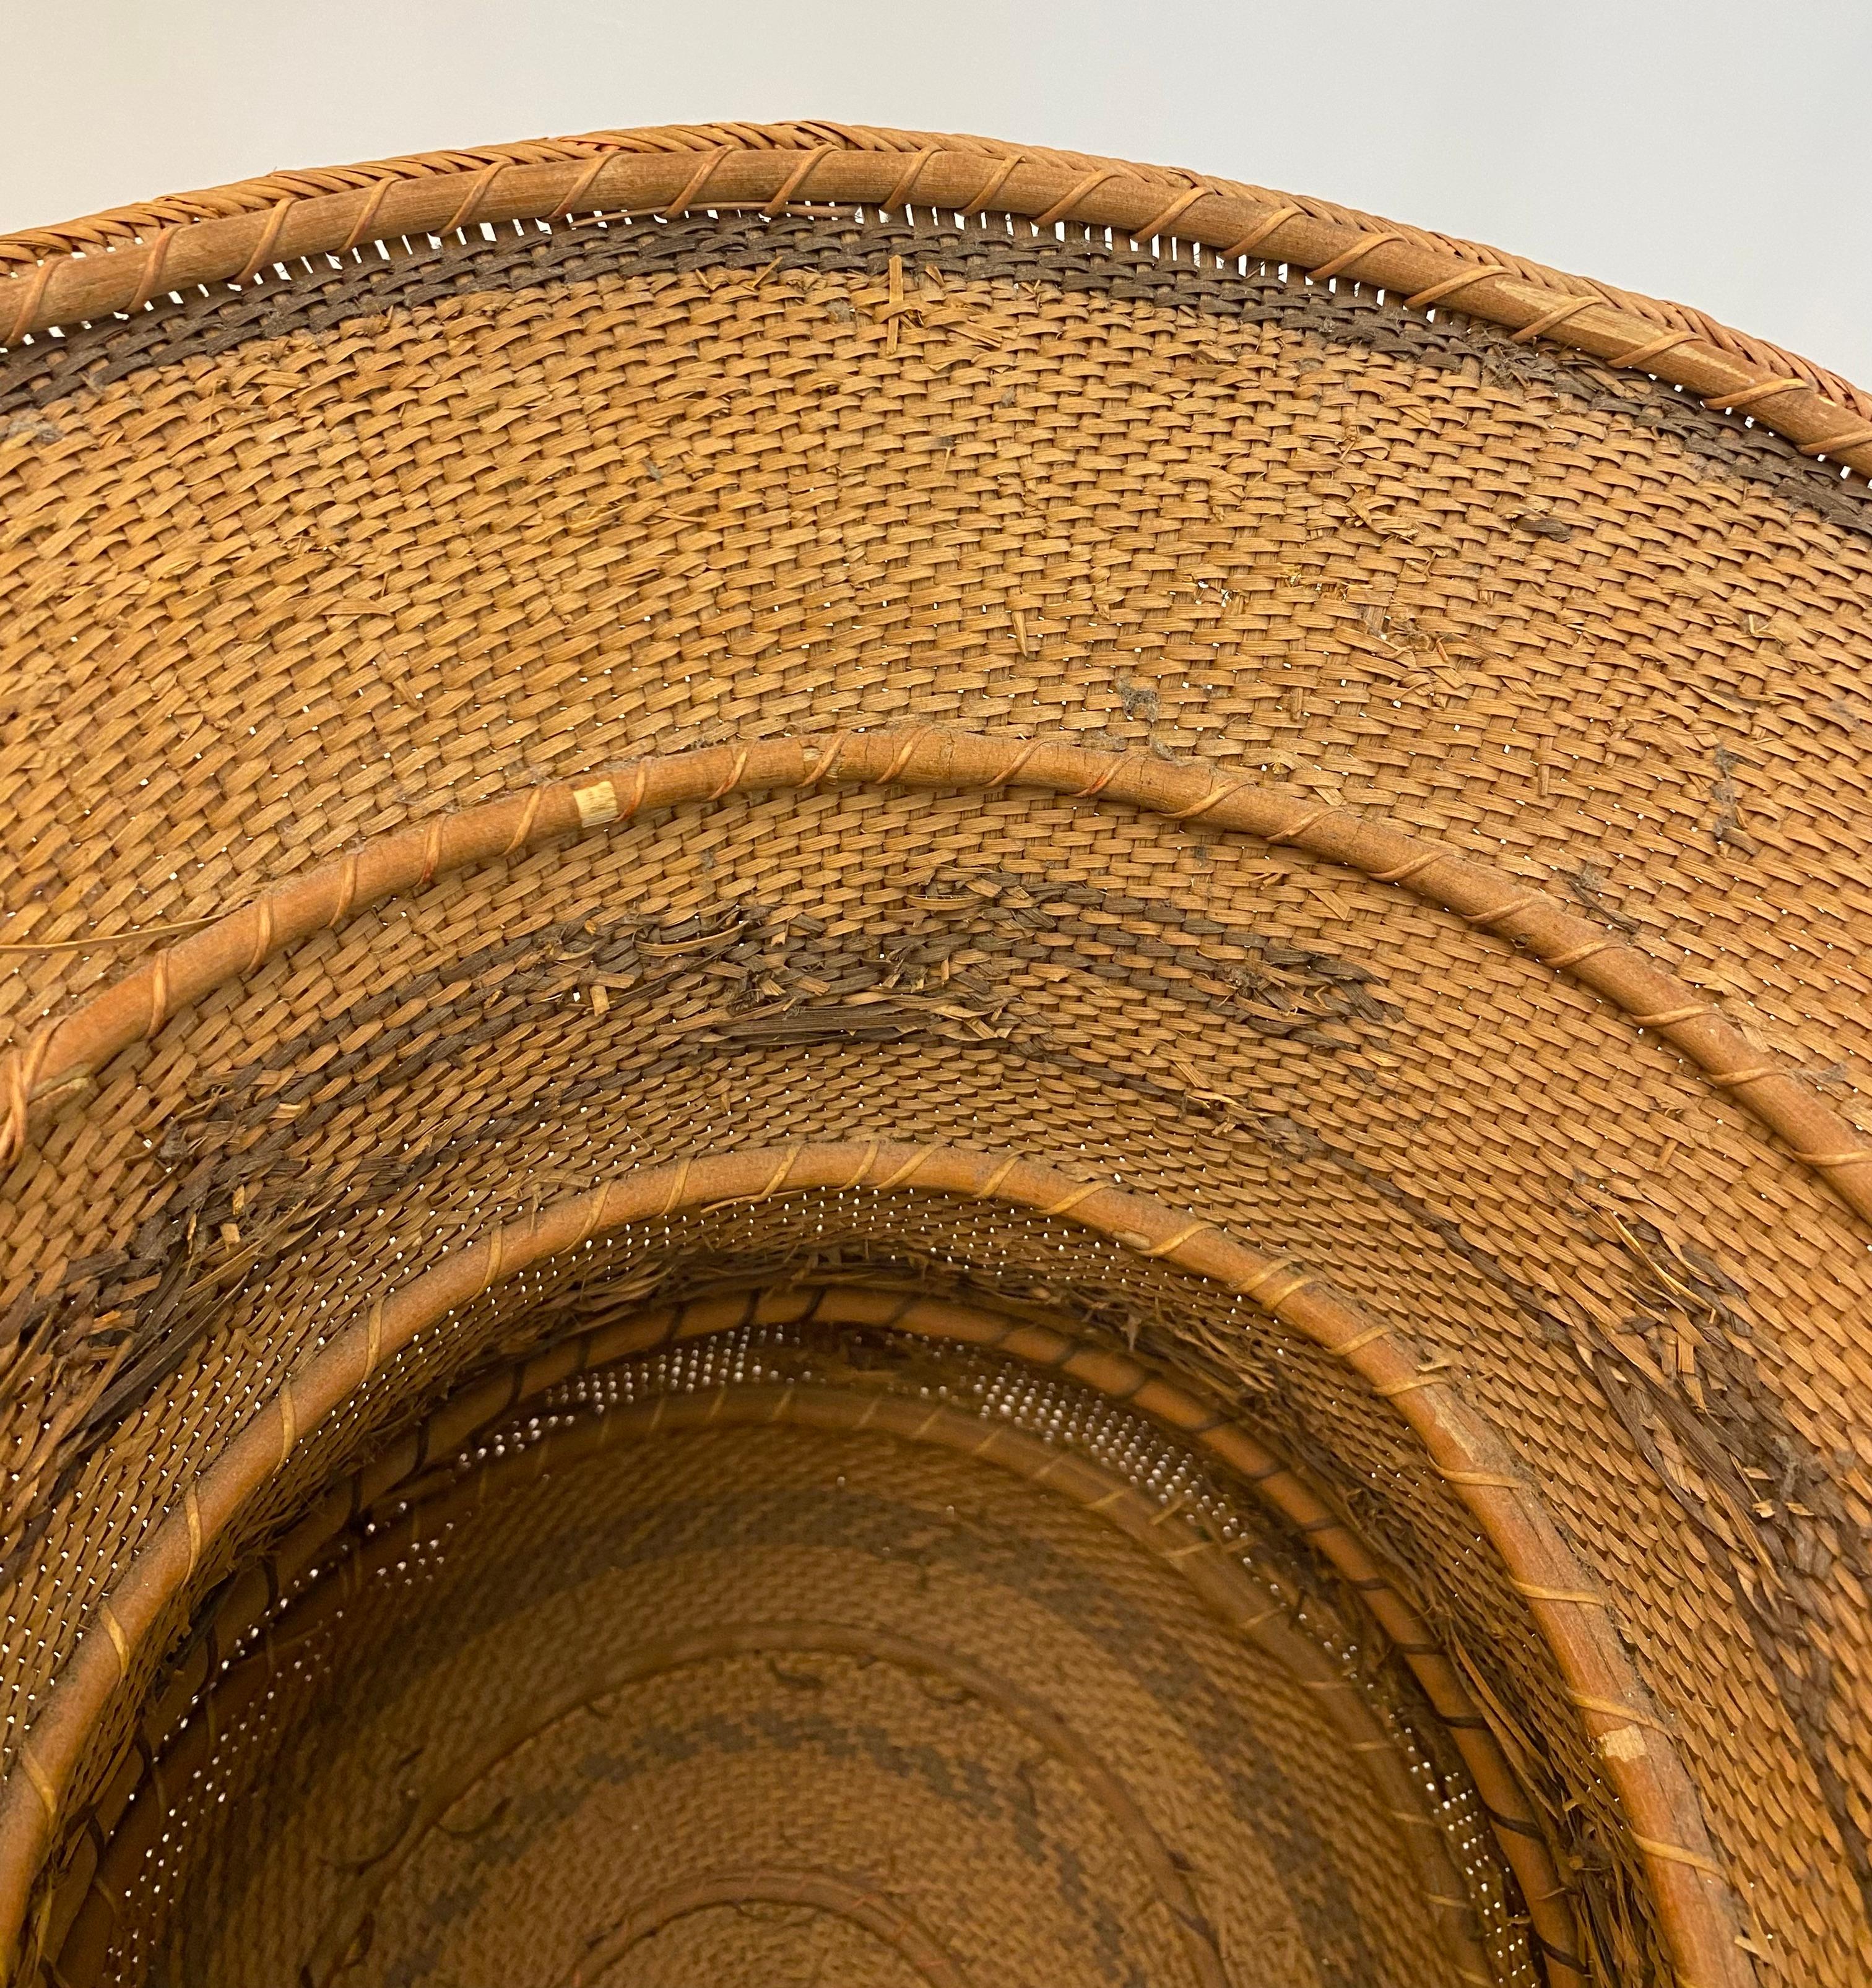 A fine hand woven basket featuring Ye'kuana Wuwa (Wiwa) - Monkeys. 

This basket is a unique piece of art made by the hands of the Ye'kuana women from deep in the Amazon of Venezuela. The designs reflect sacred and natural symbols from both their